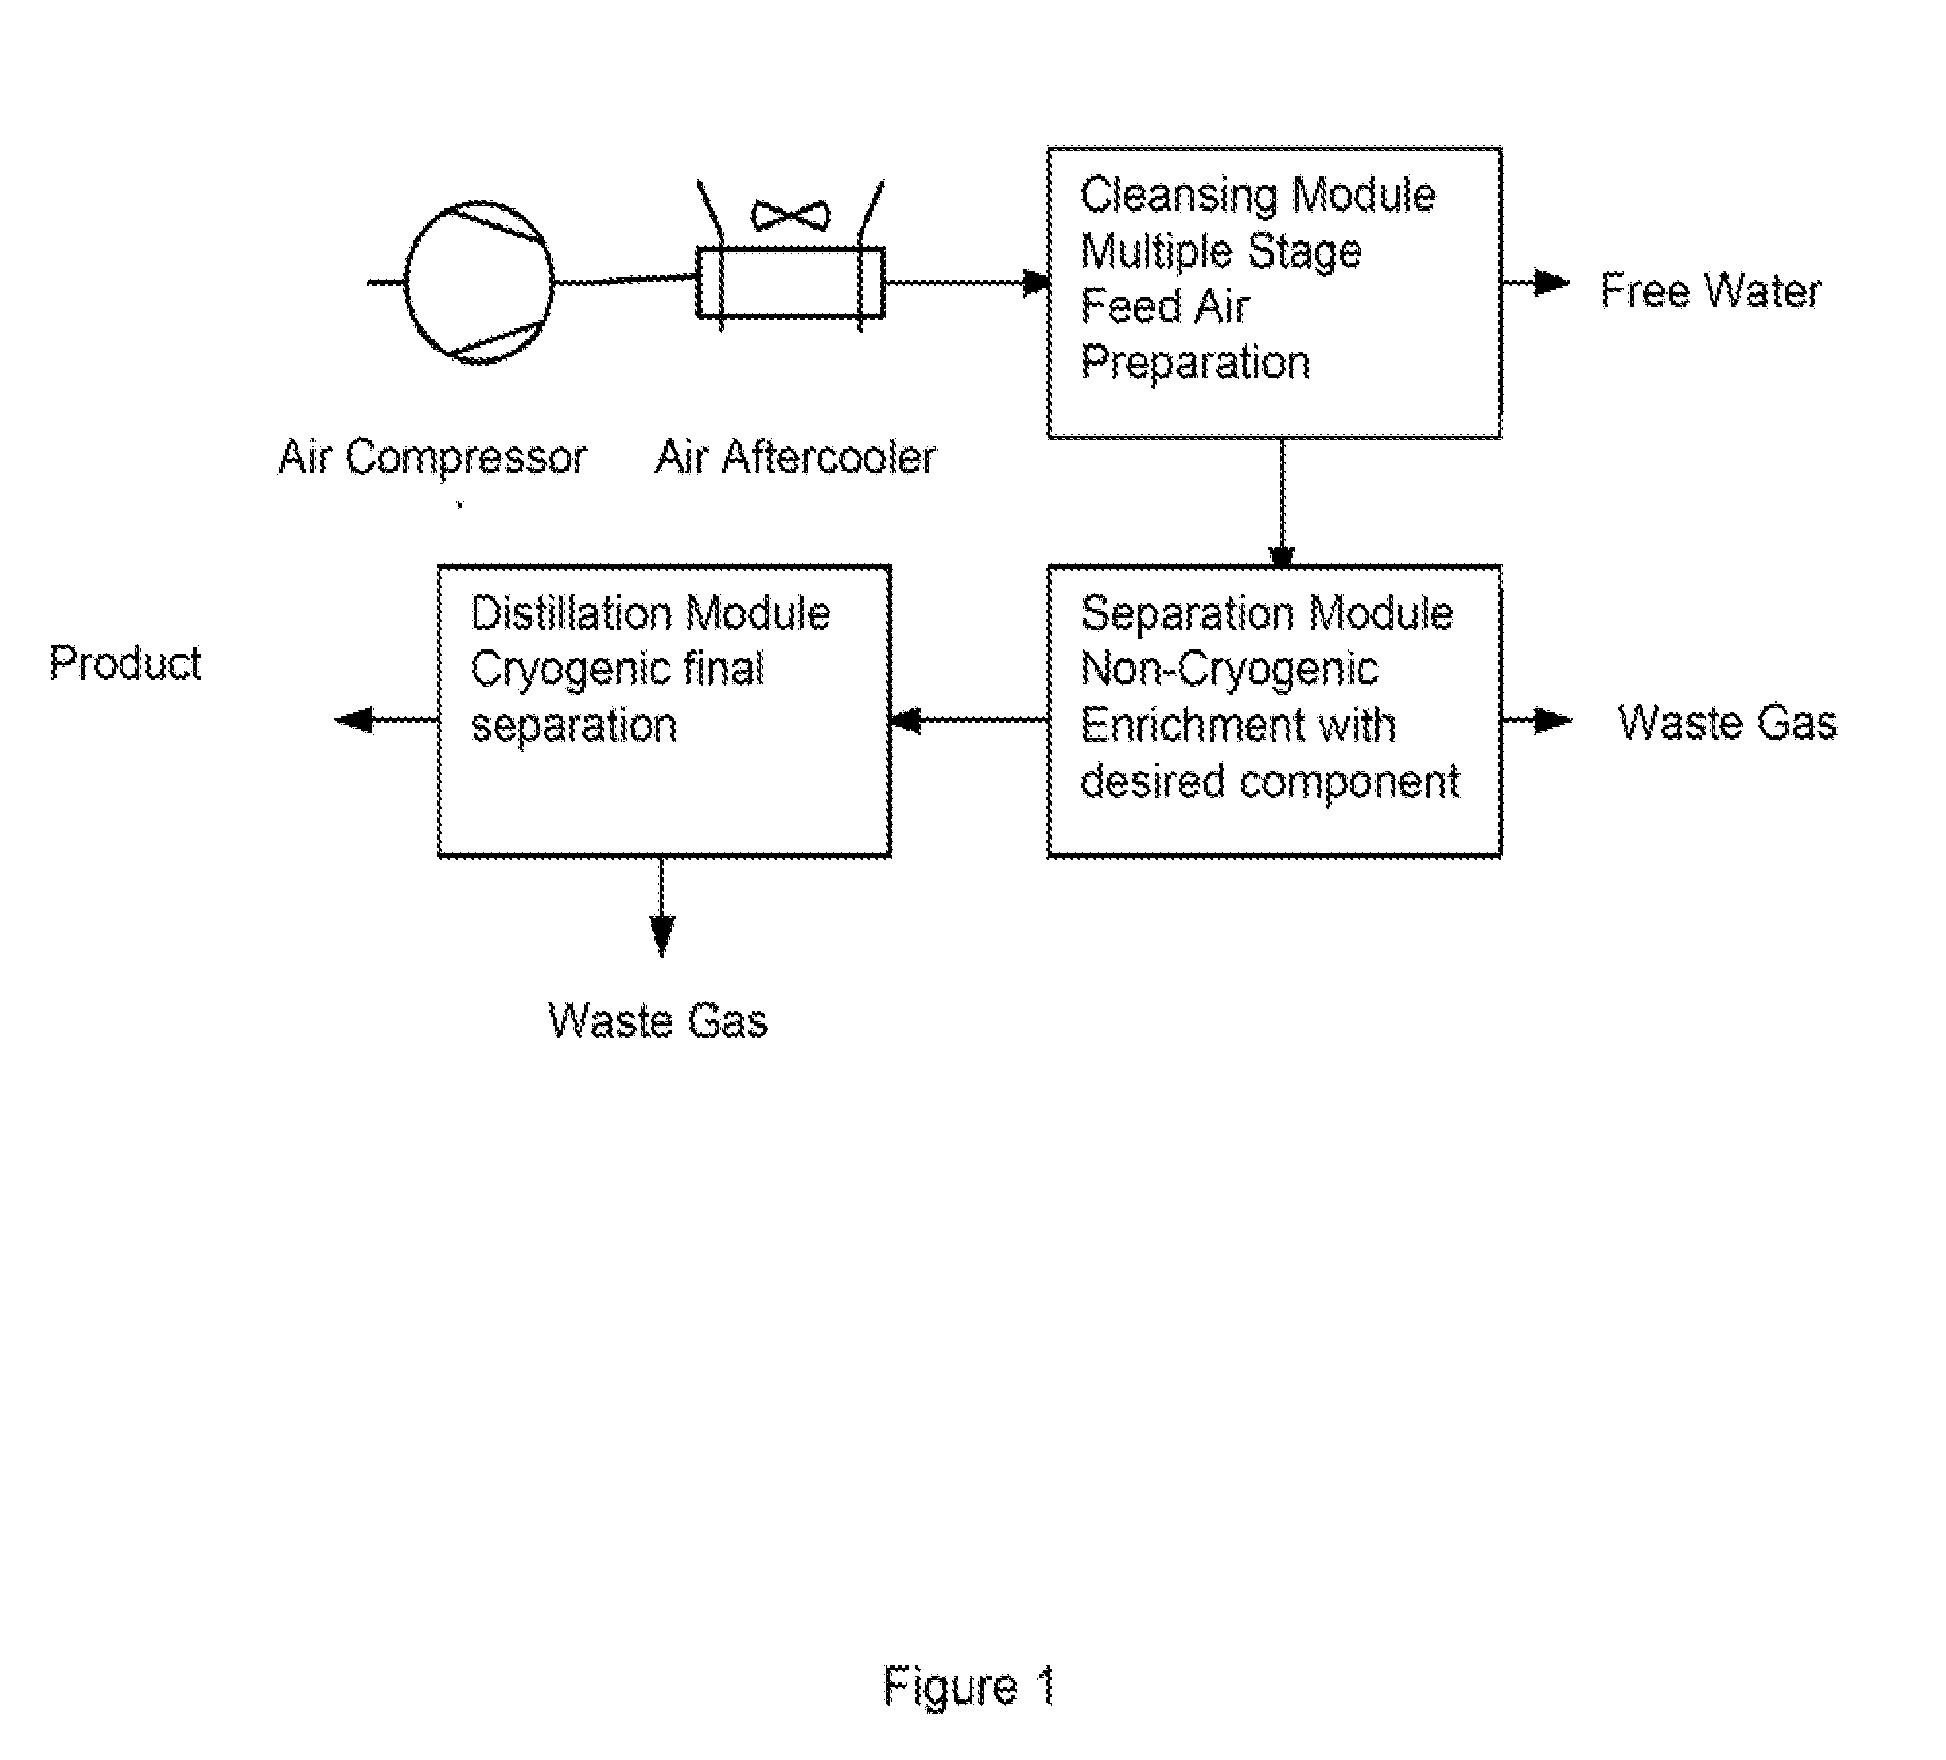 Hybrid Air Separation Method with Noncryogenic Preliminary Enrichment and Cryogenic Purification Based on a Single Component Gas or Liquid Generator